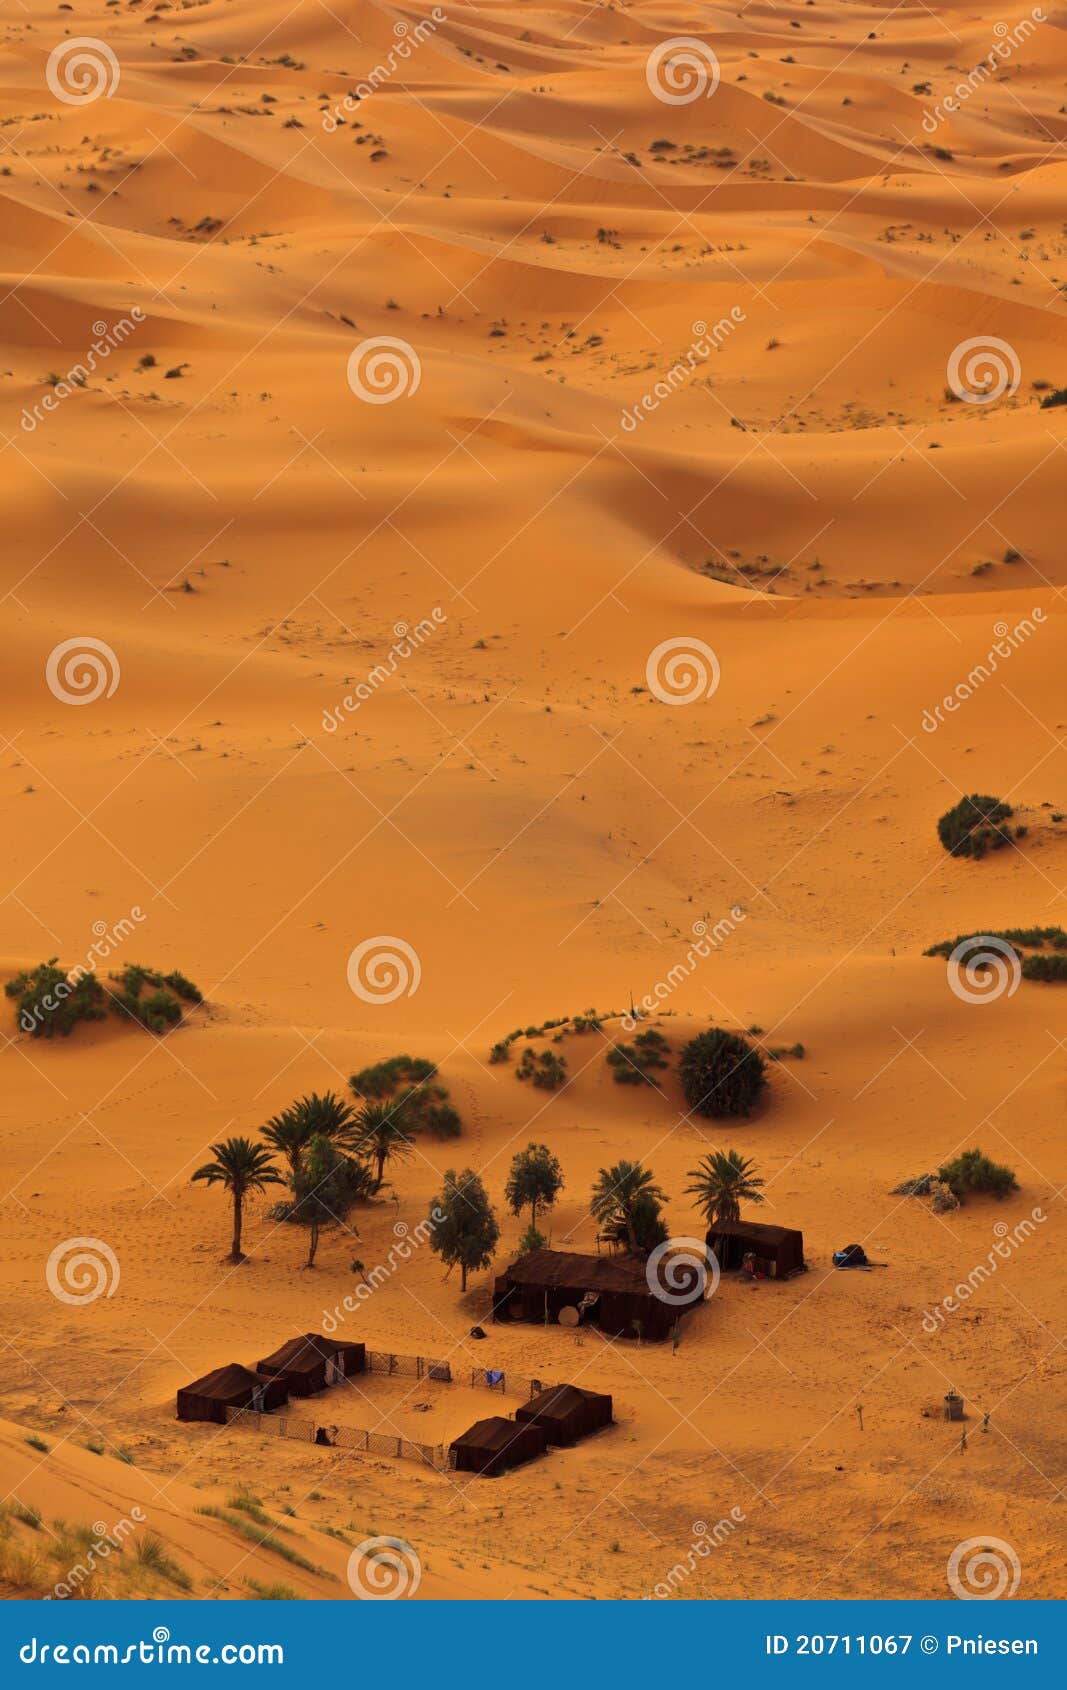 Aerial View of Sahara and Bedouin Camp, Morocco Stock Image - Image of ...